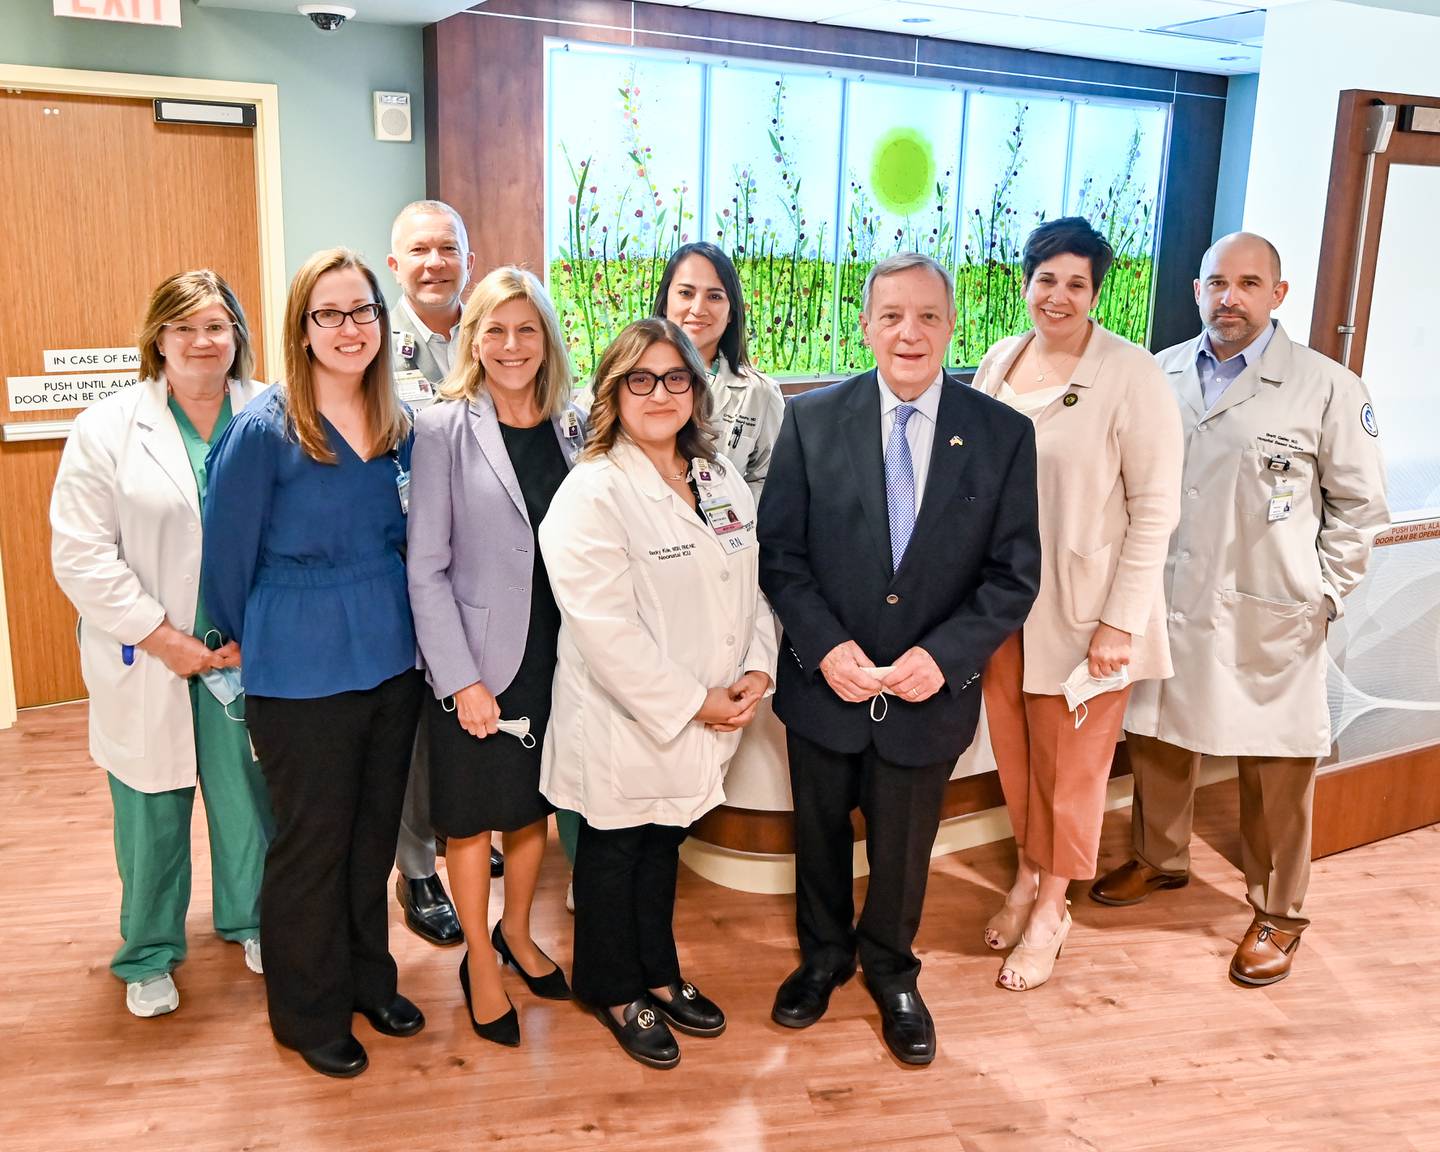 U.S. Sen. Dick Durbin, D-Illinois toured the future Amy, Matthew and Jay Vana Neonatal Intensive Care Unit at Silver Cross in New Lenox on Wednesday, April 20, 2022. Durbin (front right) is pictured with Silver Cross Hospital President and CEO Ruth Colby (third from left) along with several of Silver Cross' future NICU staff and physicians. Pictured, from left are Chris Henneberry; Dr. Corryn Greenwood, neonatologist and medical director; Michael Mutterer, vice president of patient care services and chief nursing officer; Rebecca Kole, director; Dr. Kristina Baumker, neonatologist; Durbin; Will County Executive Jennifer Bertino-Tarrant; and Dr. Brett Galley, neonatologist, Lurie Neonatal Outreach.